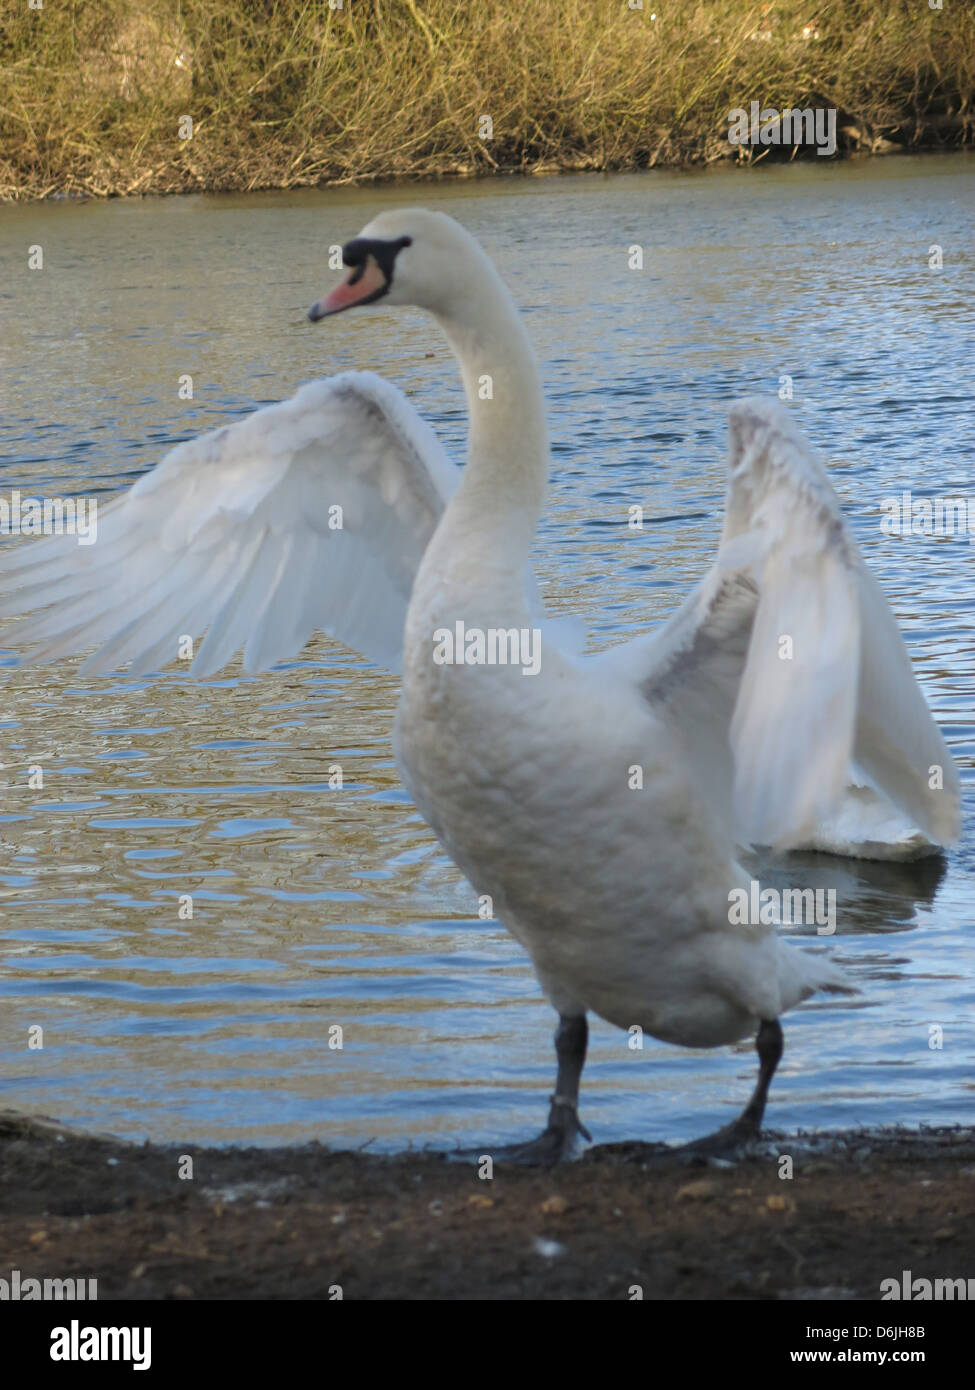 Swan With Open Wings By The River Thames, Reading, Berkshire. Stock Photo